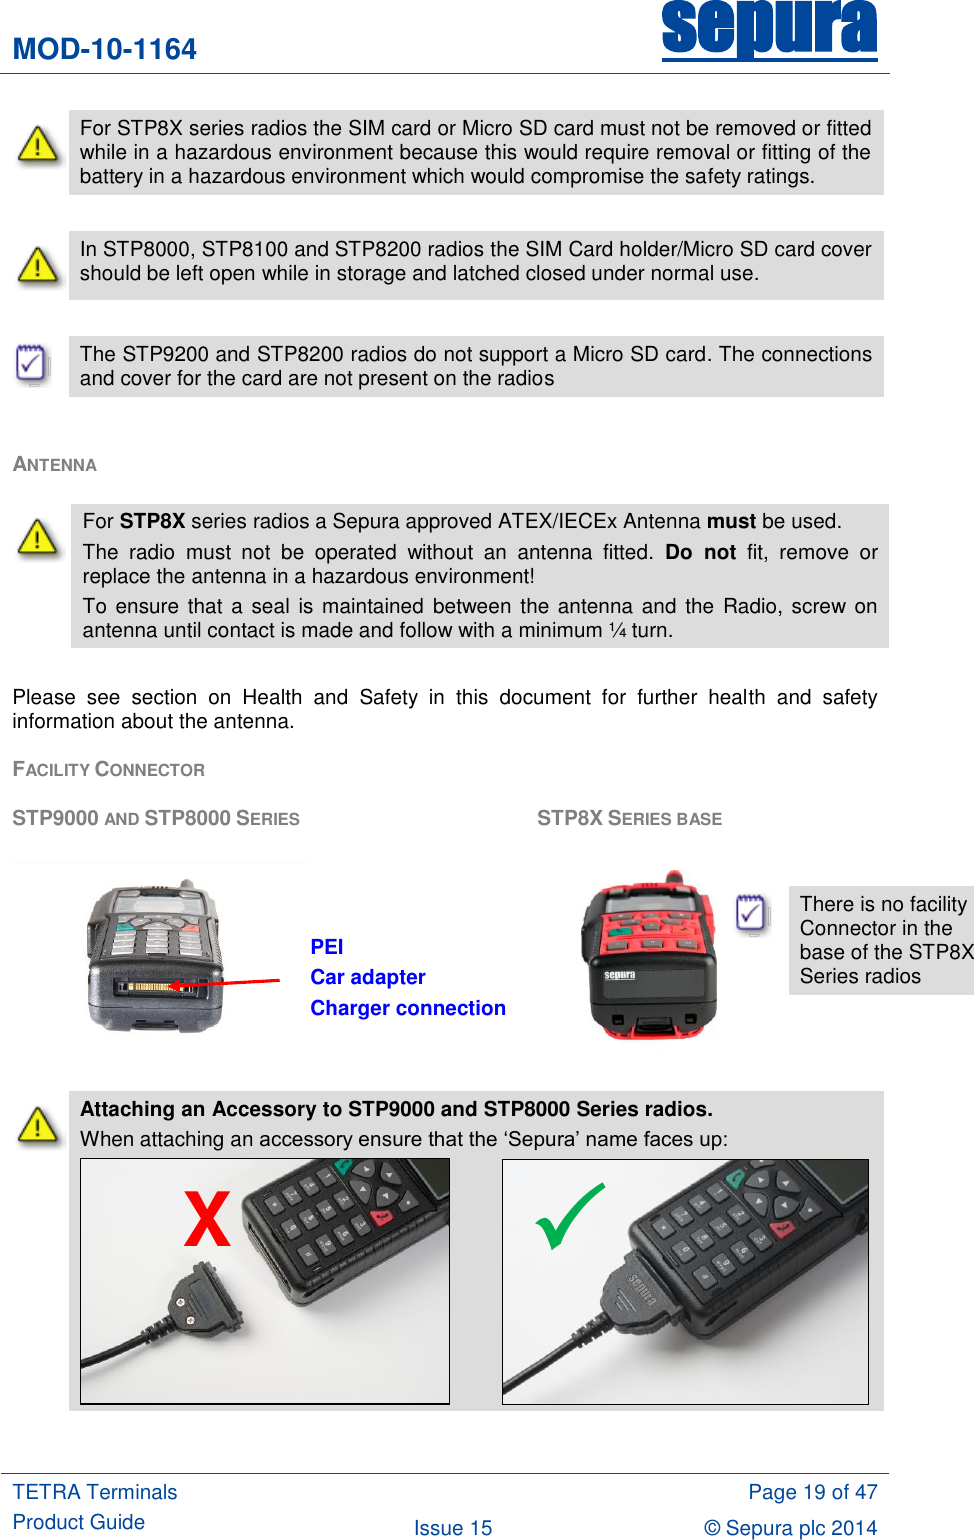 MOD-10-1164 sepura  TETRA Terminals Product Guide  Page 19 of 47 Issue 15 © Sepura plc 2014    For STP8X series radios the SIM card or Micro SD card must not be removed or fitted while in a hazardous environment because this would require removal or fitting of the battery in a hazardous environment which would compromise the safety ratings.   In STP8000, STP8100 and STP8200 radios the SIM Card holder/Micro SD card cover should be left open while in storage and latched closed under normal use.   The STP9200 and STP8200 radios do not support a Micro SD card. The connections and cover for the card are not present on the radios  ANTENNA  Please  see  section  on  Health  and  Safety  in  this  document  for  further  health  and  safety information about the antenna. FACILITY CONNECTOR    STP9000 AND STP8000 SERIES        STP8X SERIES BASE                                                                Attaching an Accessory to STP9000 and STP8000 Series radios.  When attaching an accessory ensure that the „Sepura‟ name faces up:      For STP8X series radios a Sepura approved ATEX/IECEx Antenna must be used. The  radio  must  not  be  operated  without  an  antenna  fitted.  Do  not  fit,  remove  or replace the antenna in a hazardous environment! To ensure that a seal is maintained  between the antenna and  the Radio, screw on antenna until contact is made and follow with a minimum ¼ turn. X PEI Car adapter Charger connection   There is no facility Connector in the base of the STP8X Series radios  